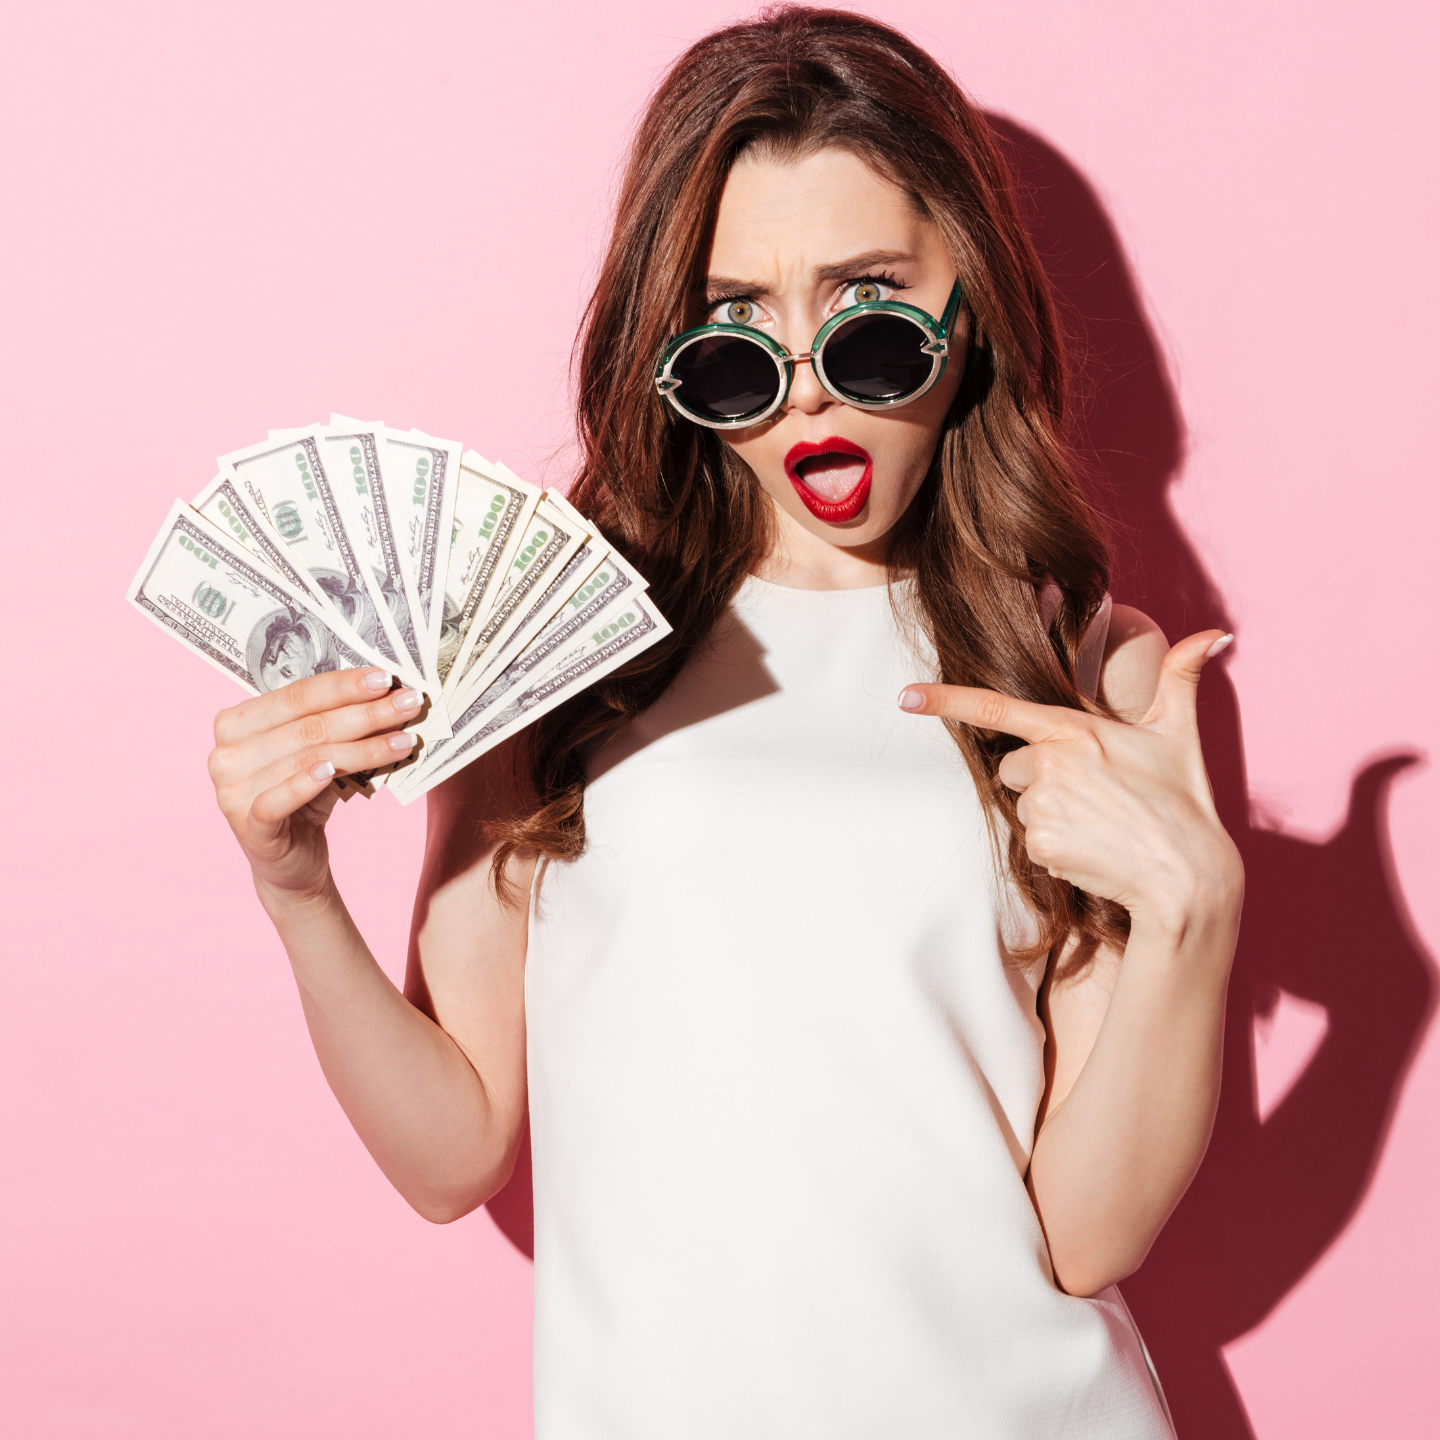 woman with sunglasses holding cash